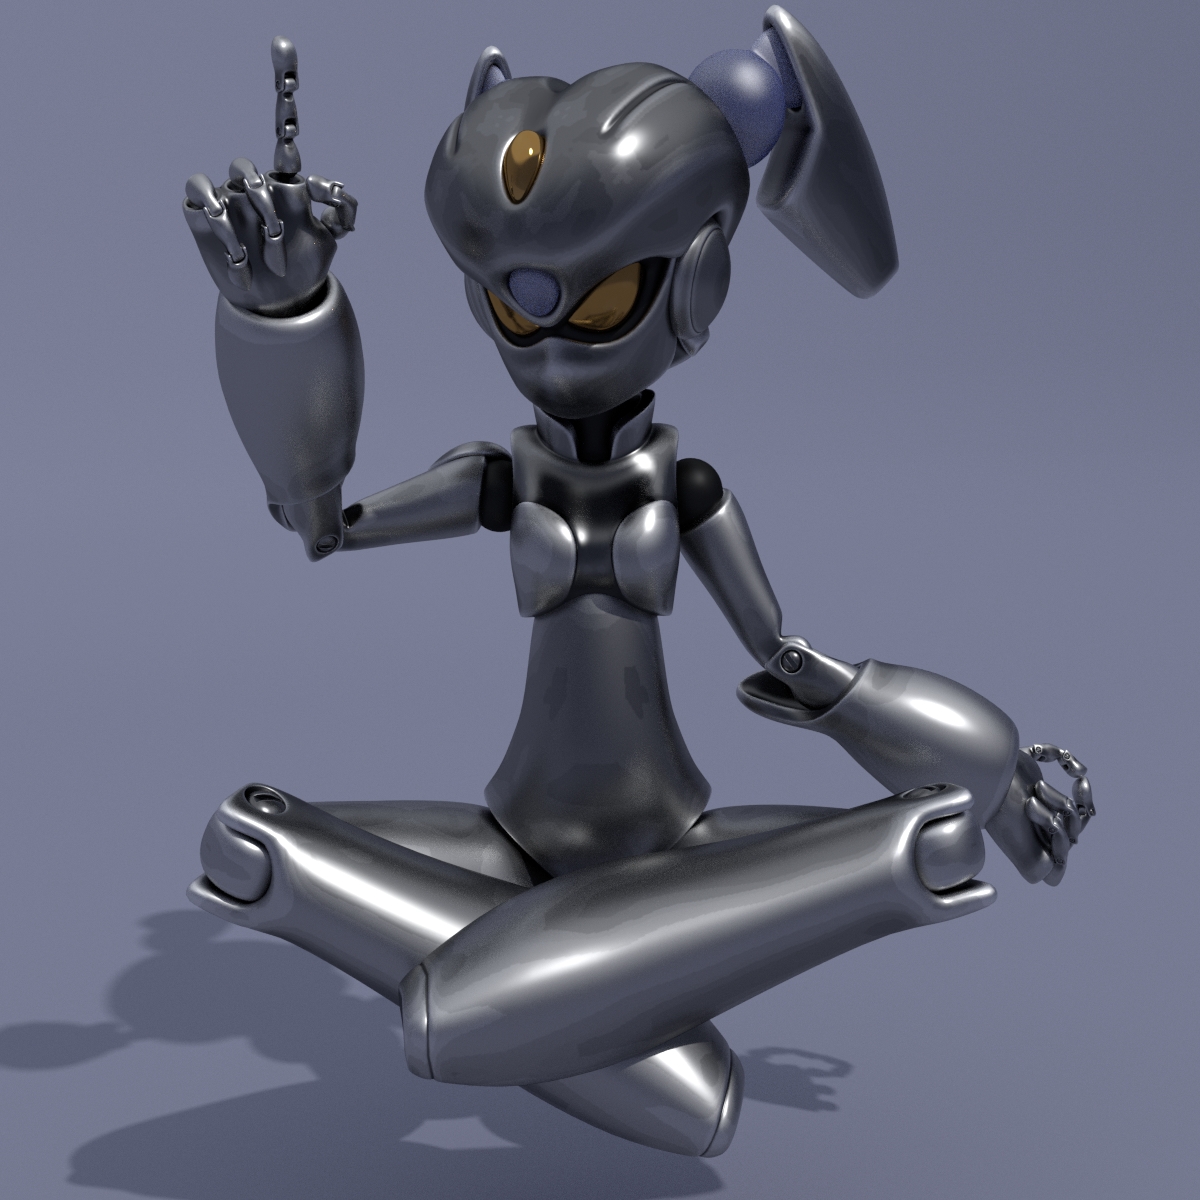 3dmodel robot toy girl Character design android Mechanic 3D